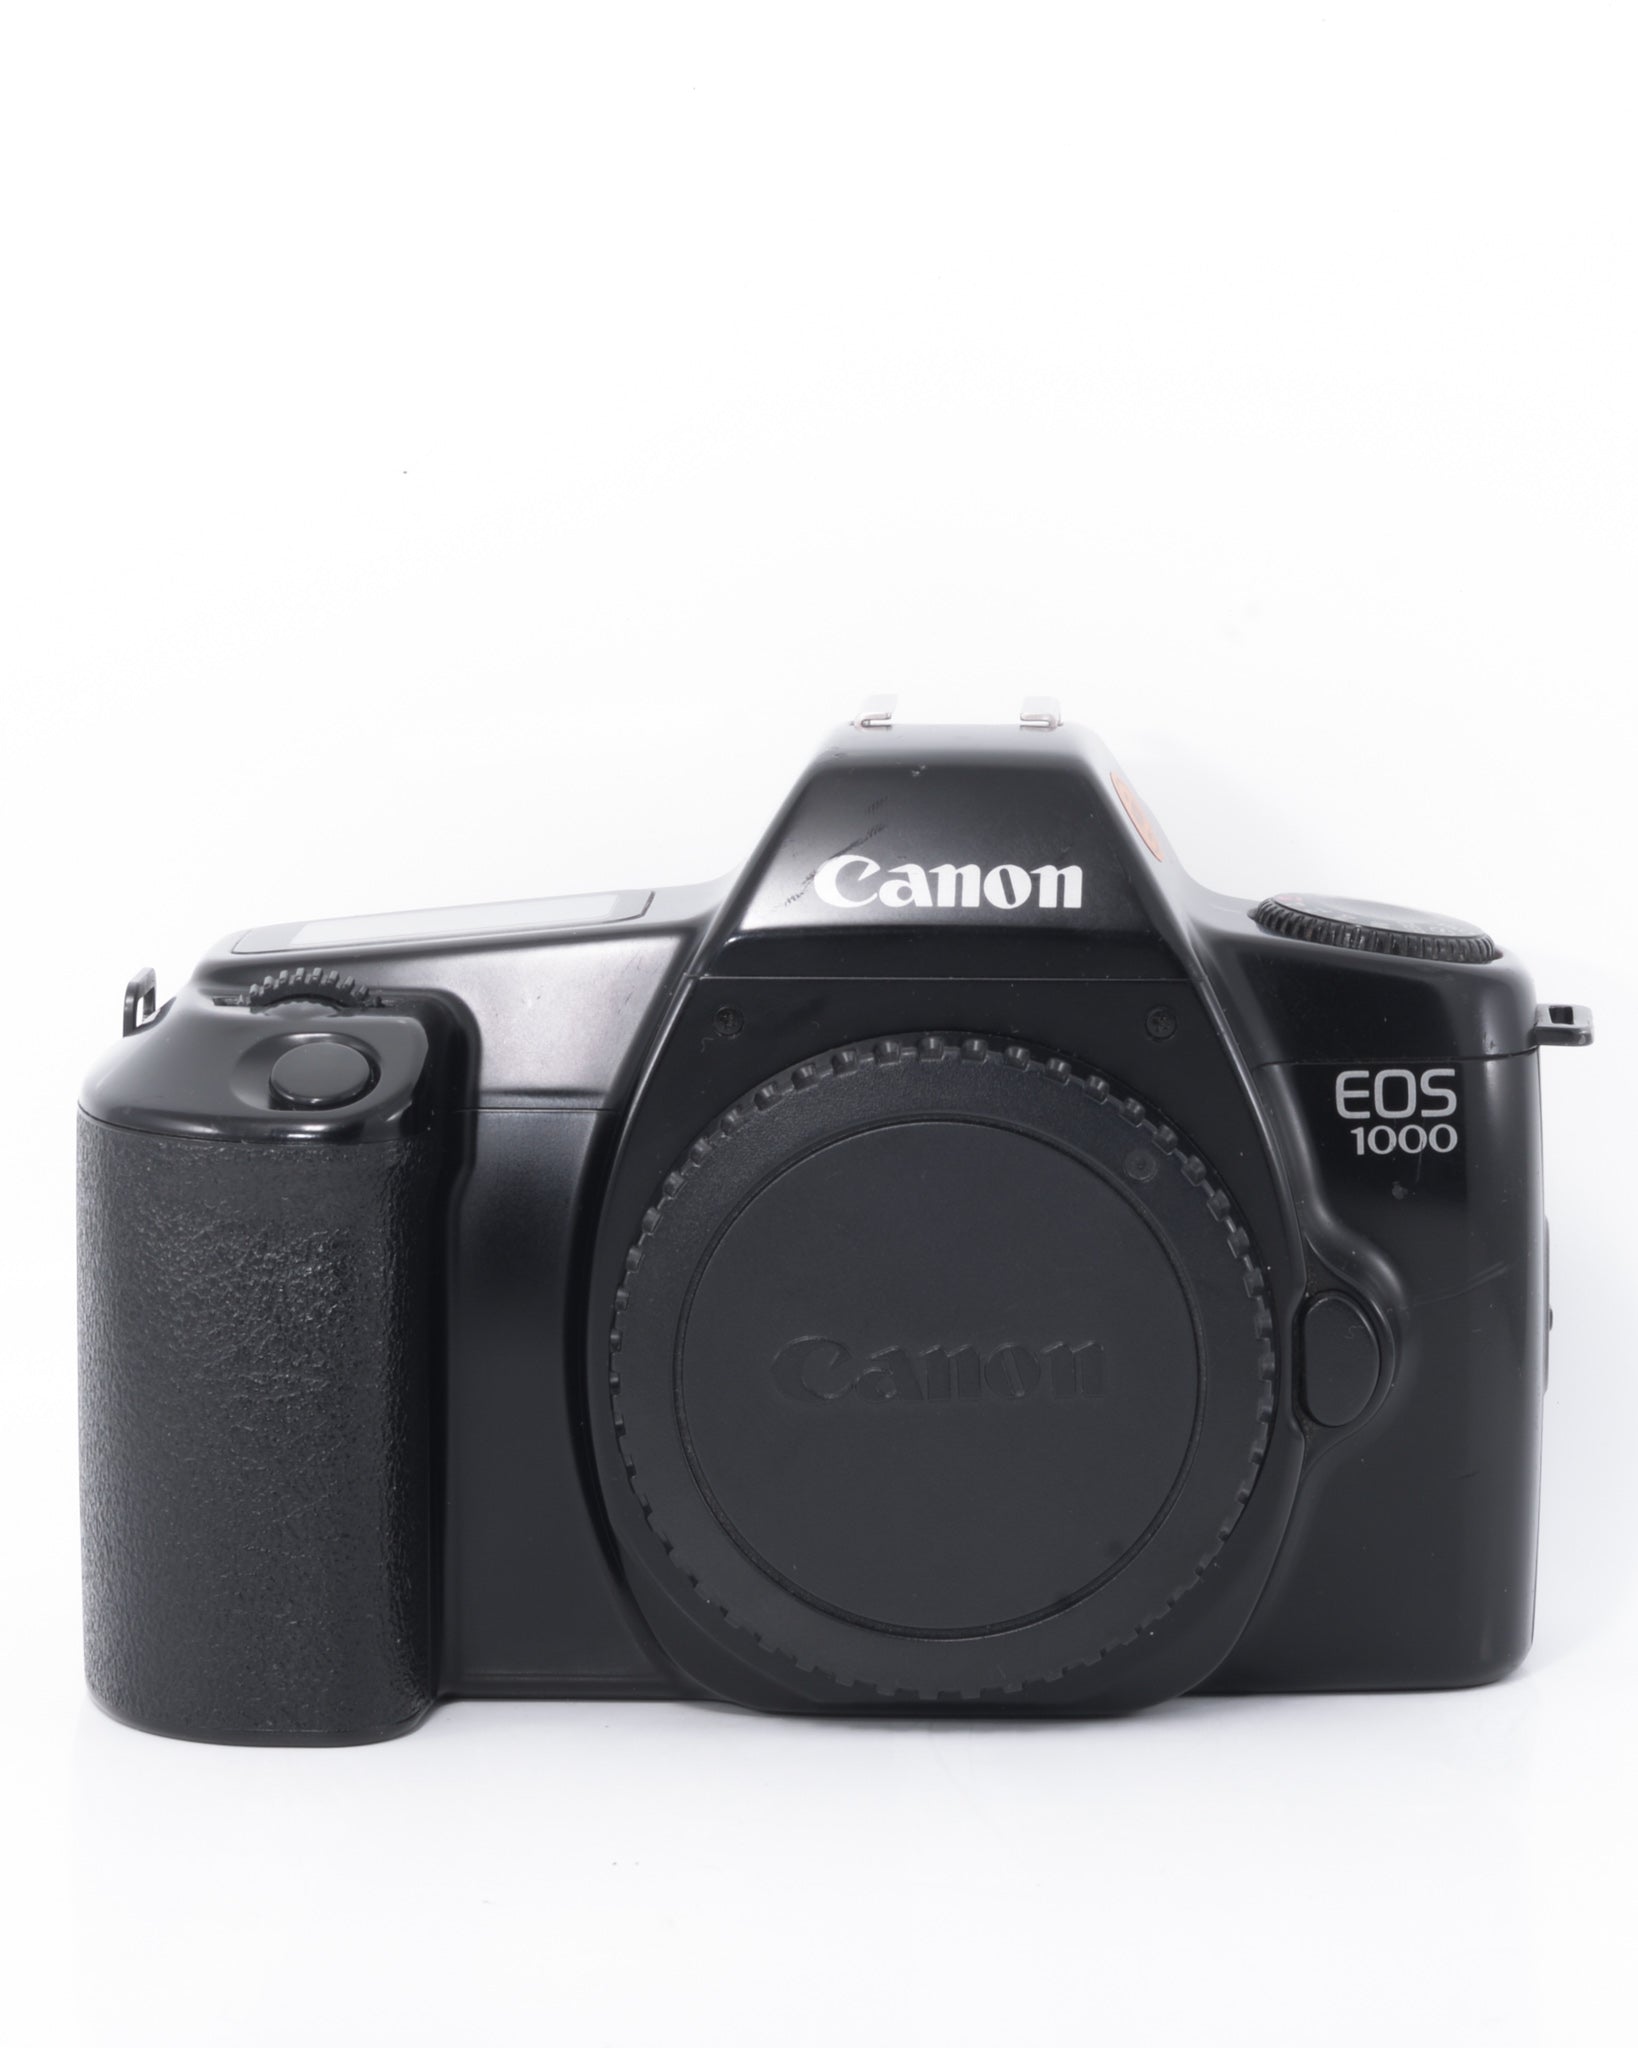 Canon EOS 1000 35mm SLR Film Camera body only